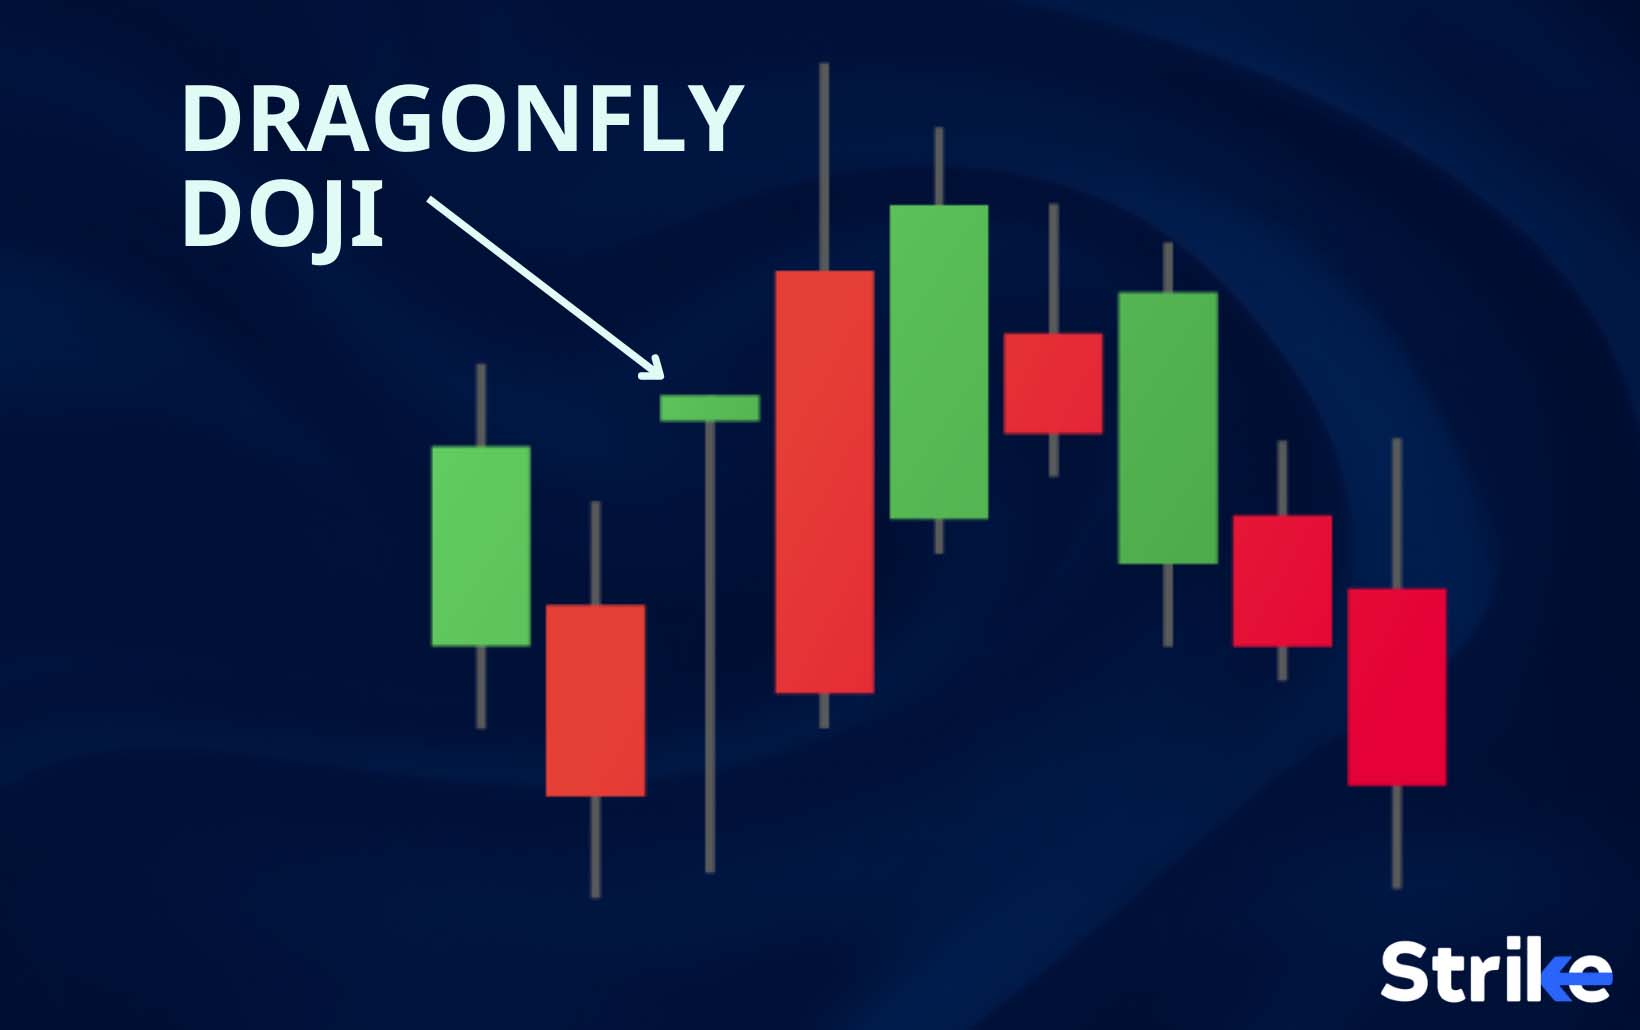 Dragonfly Doji: Definition, Structure, Trading, Examples, and Advantages